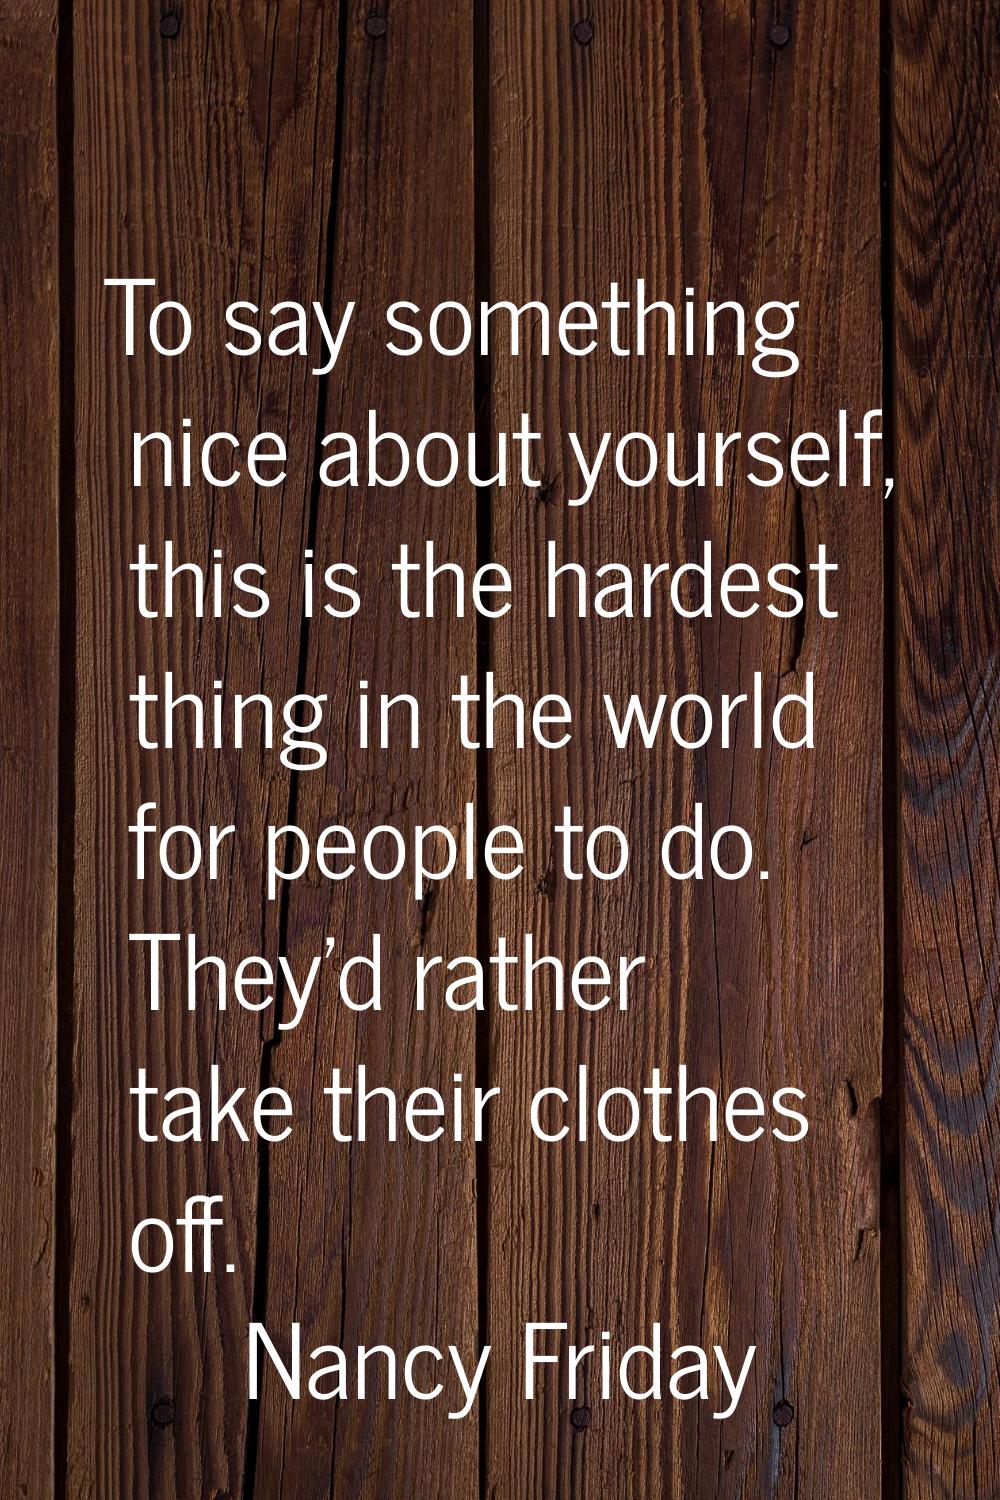 To say something nice about yourself, this is the hardest thing in the world for people to do. They